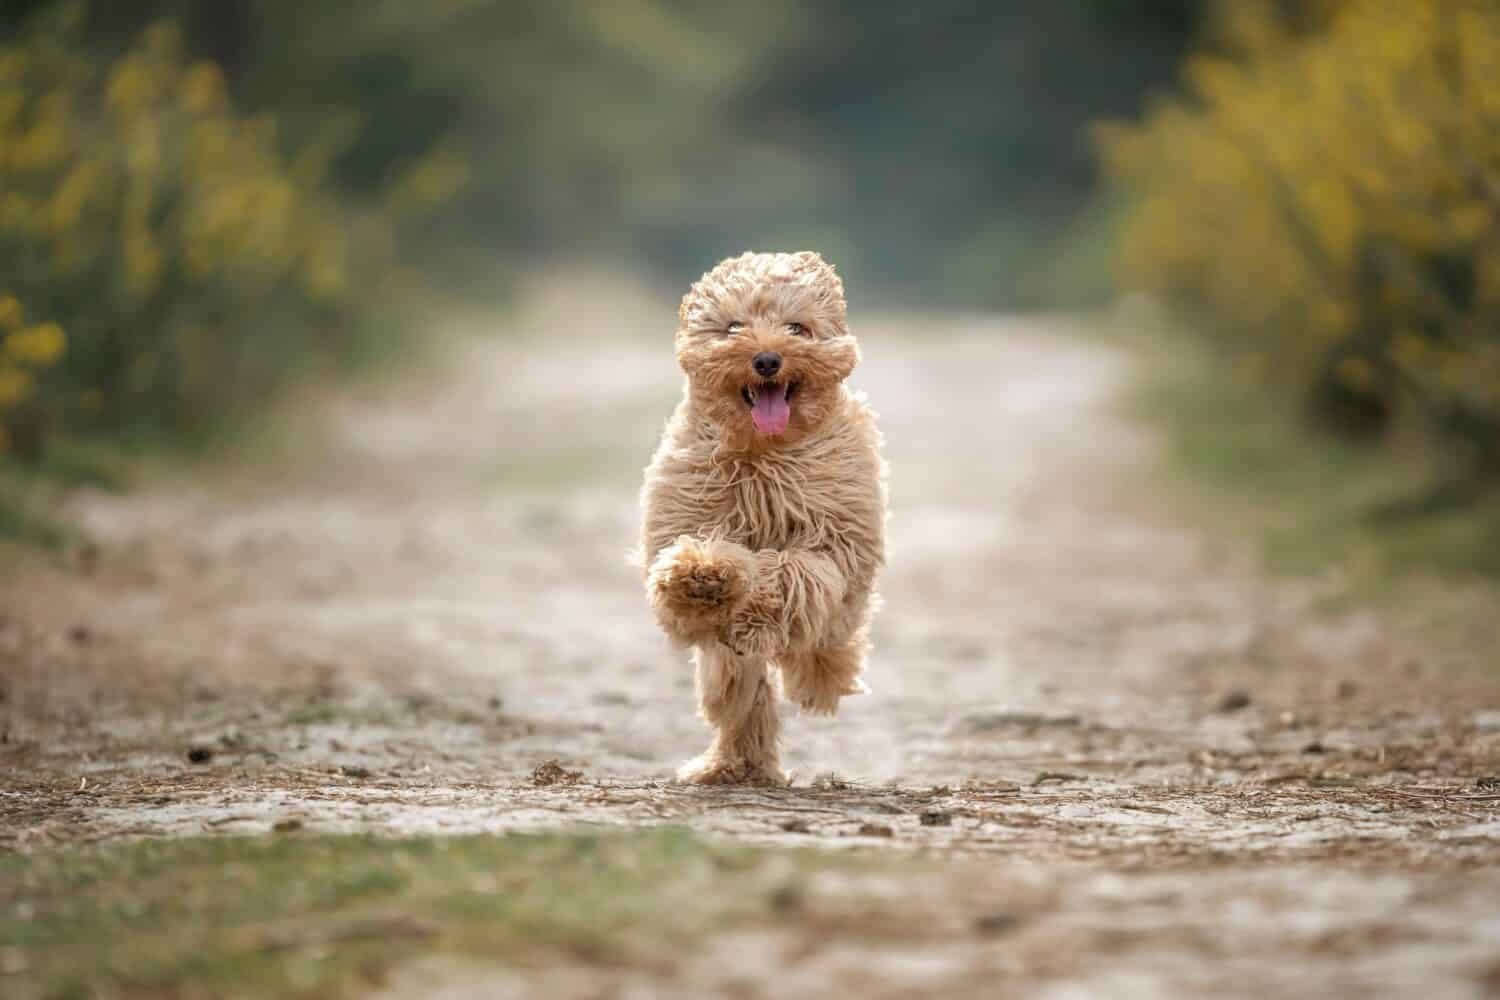 Six month old Cavapoo puppy. This puppy is apricot in colour, and running along looking like a small teddy bear